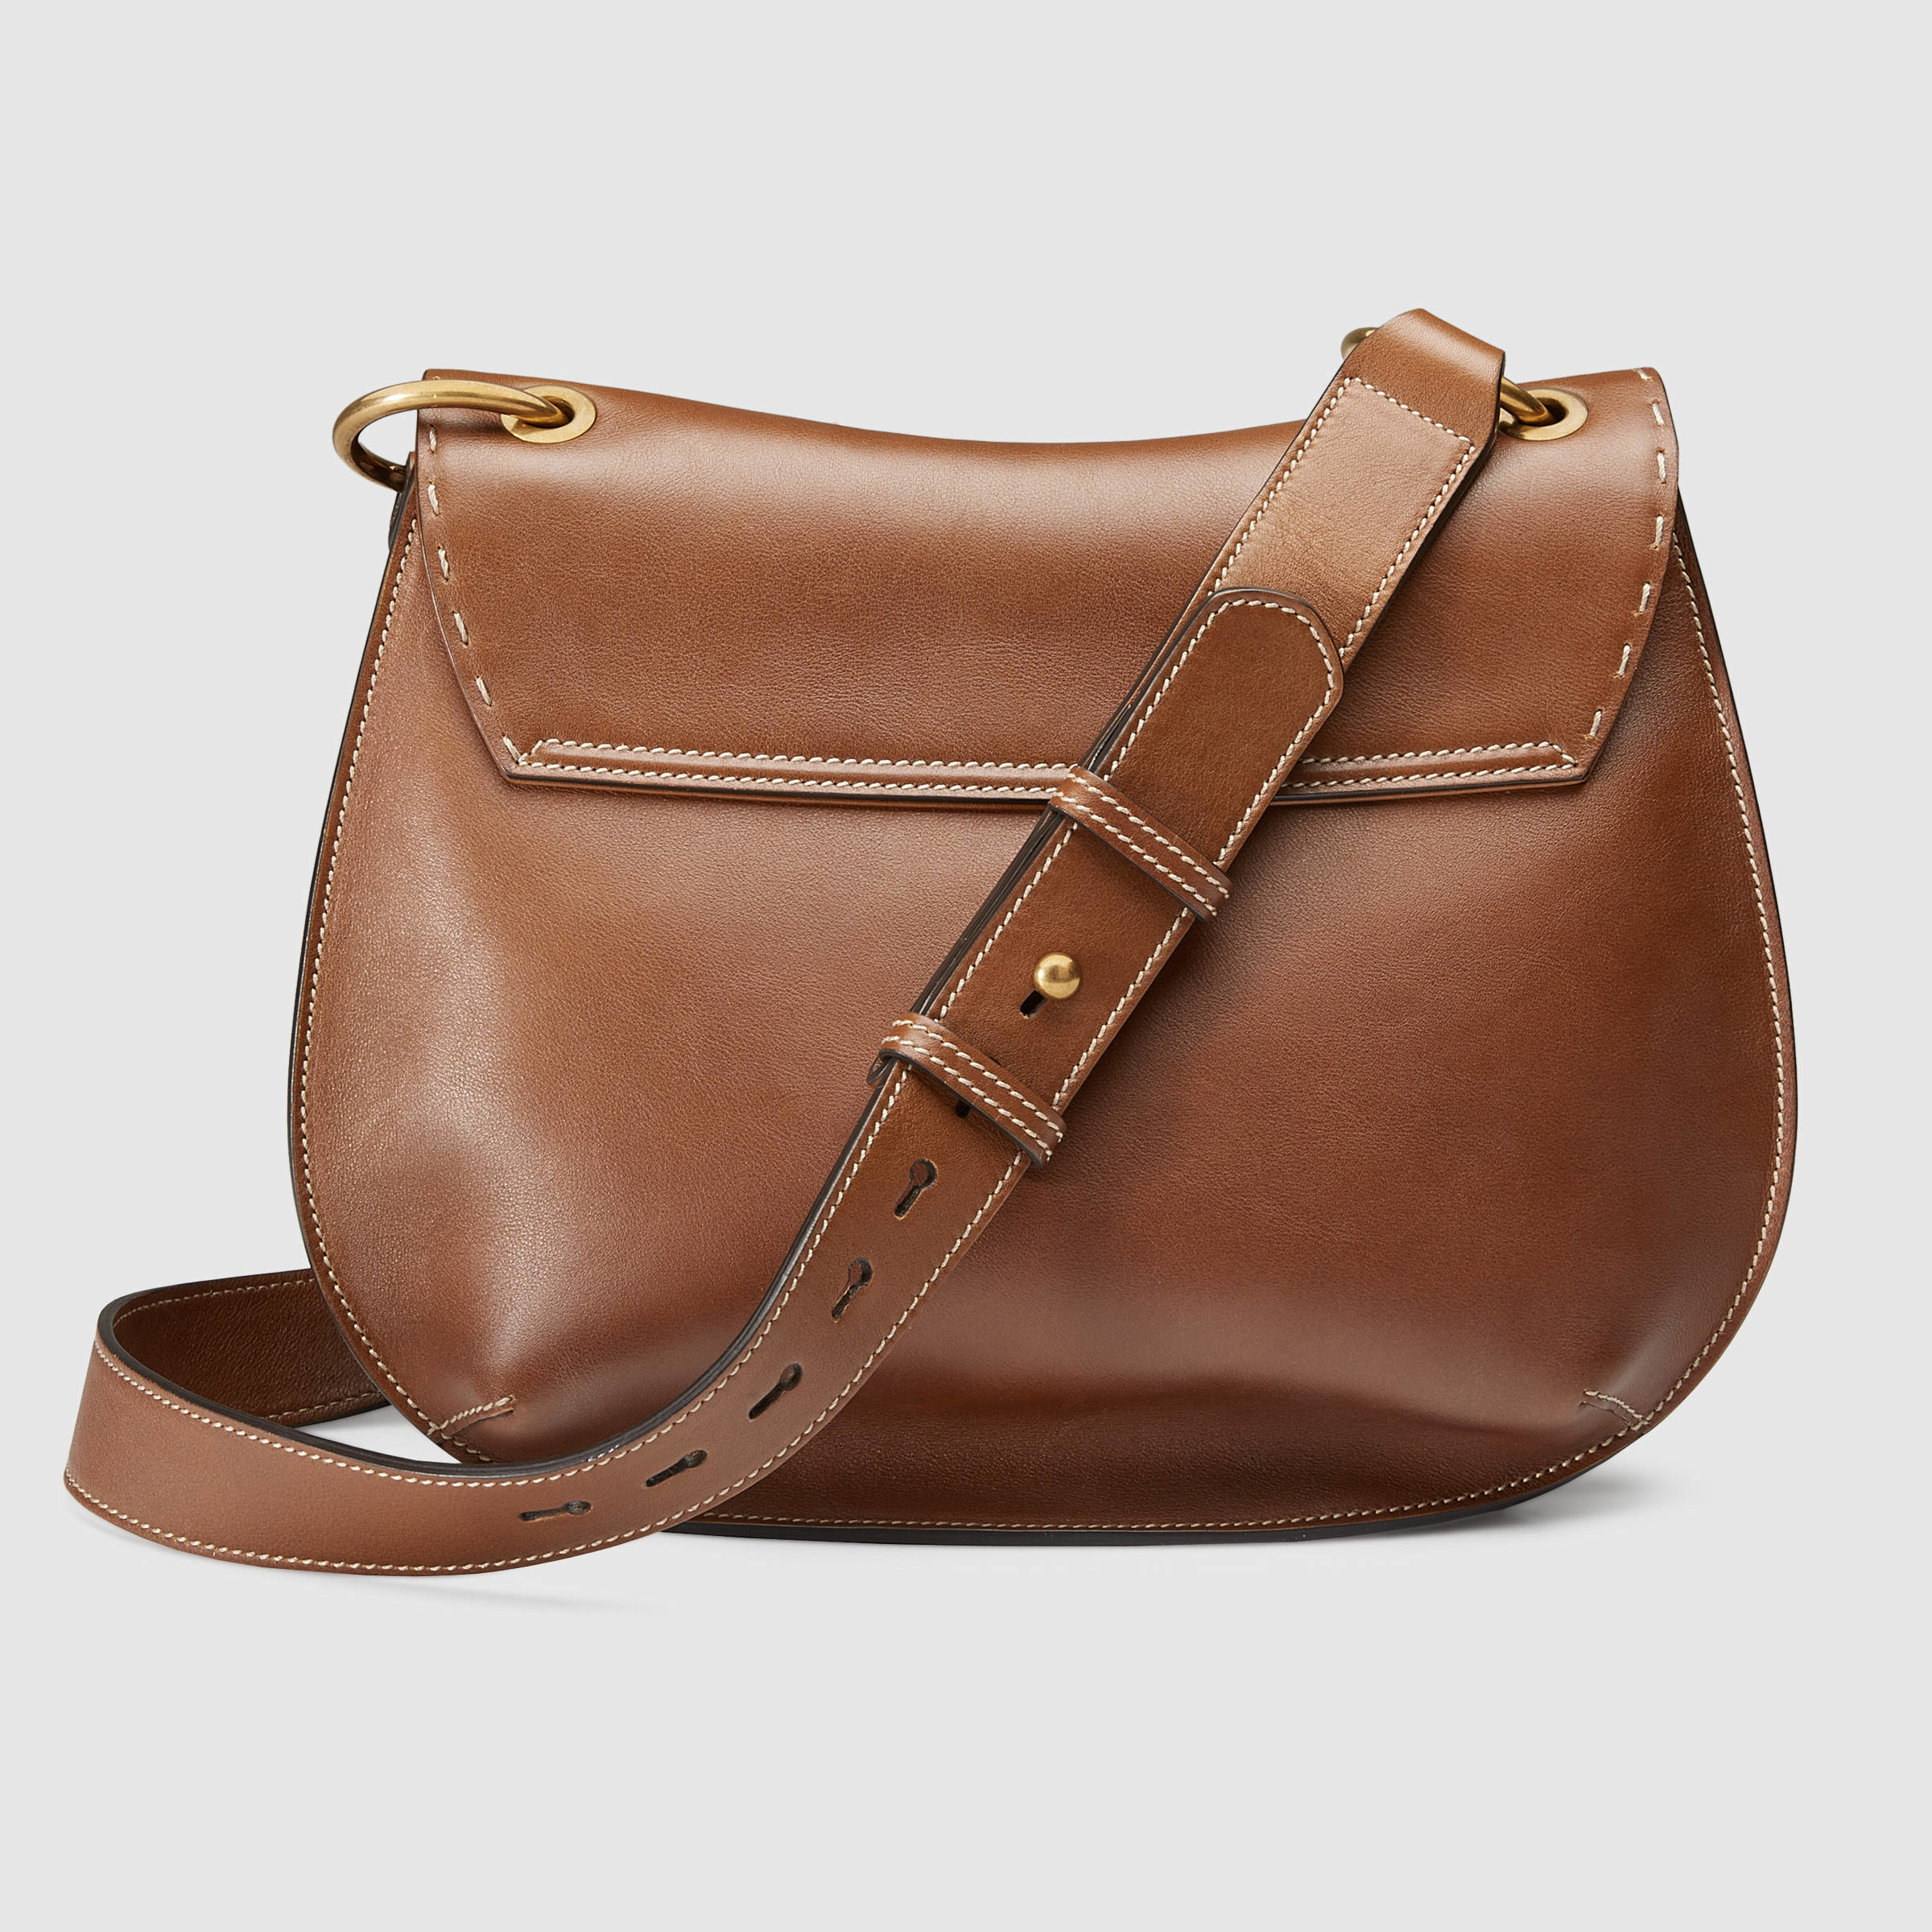 Lyst - Gucci GG Marmont Leather Shoulder Bag in Brown